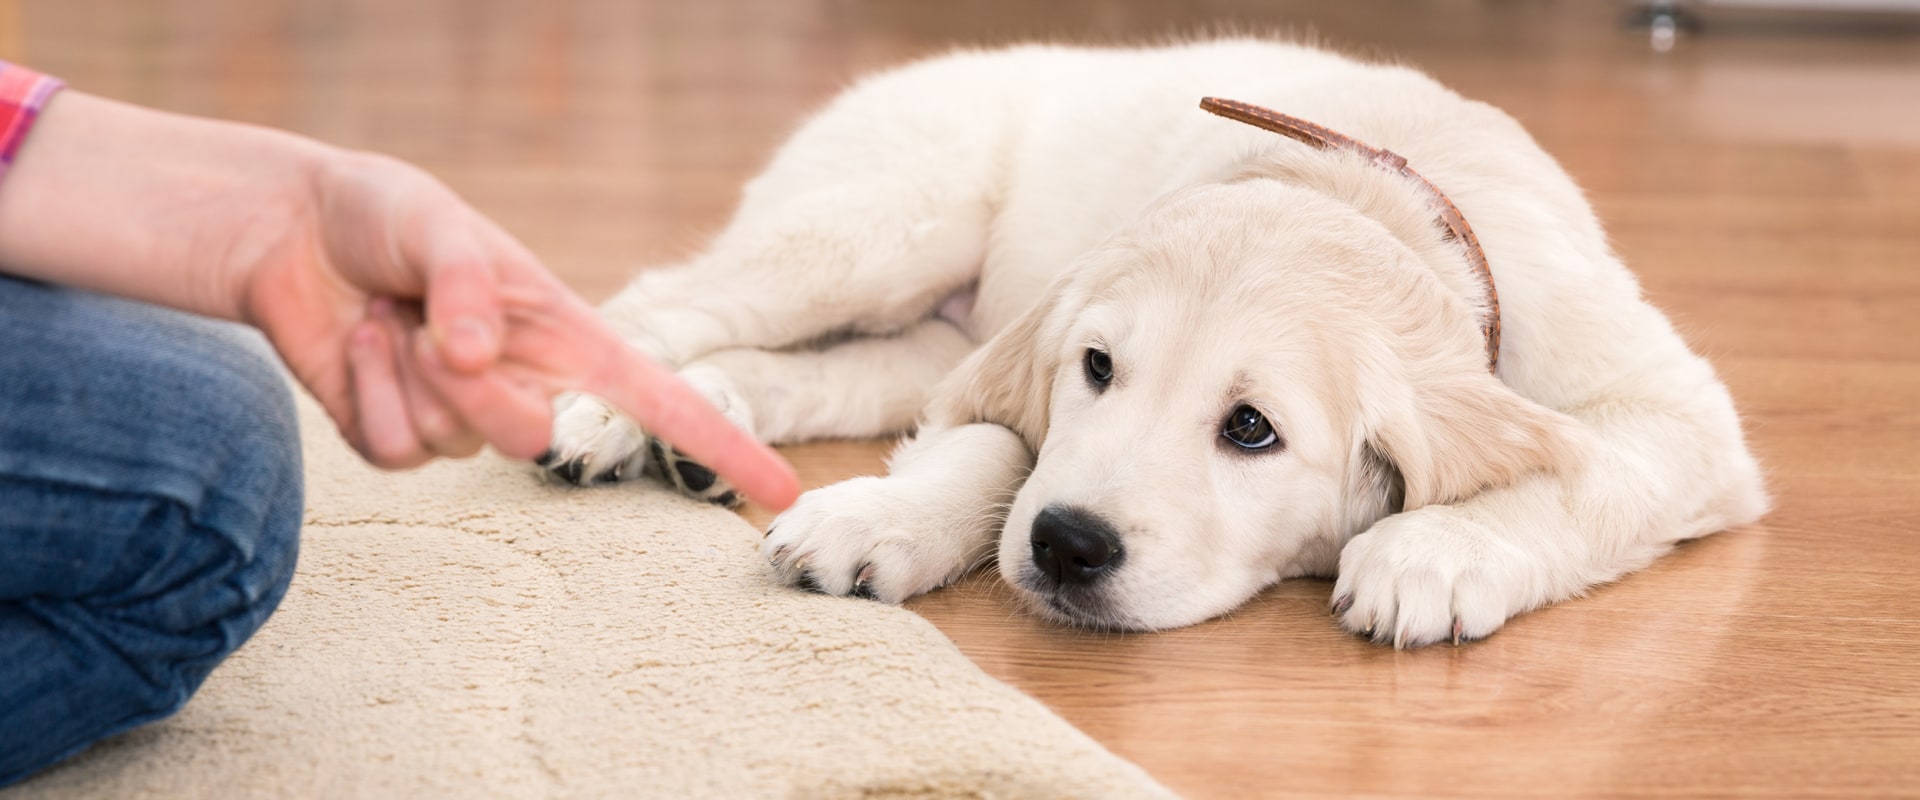 Can professional carpet cleaners remove dog urine stains?